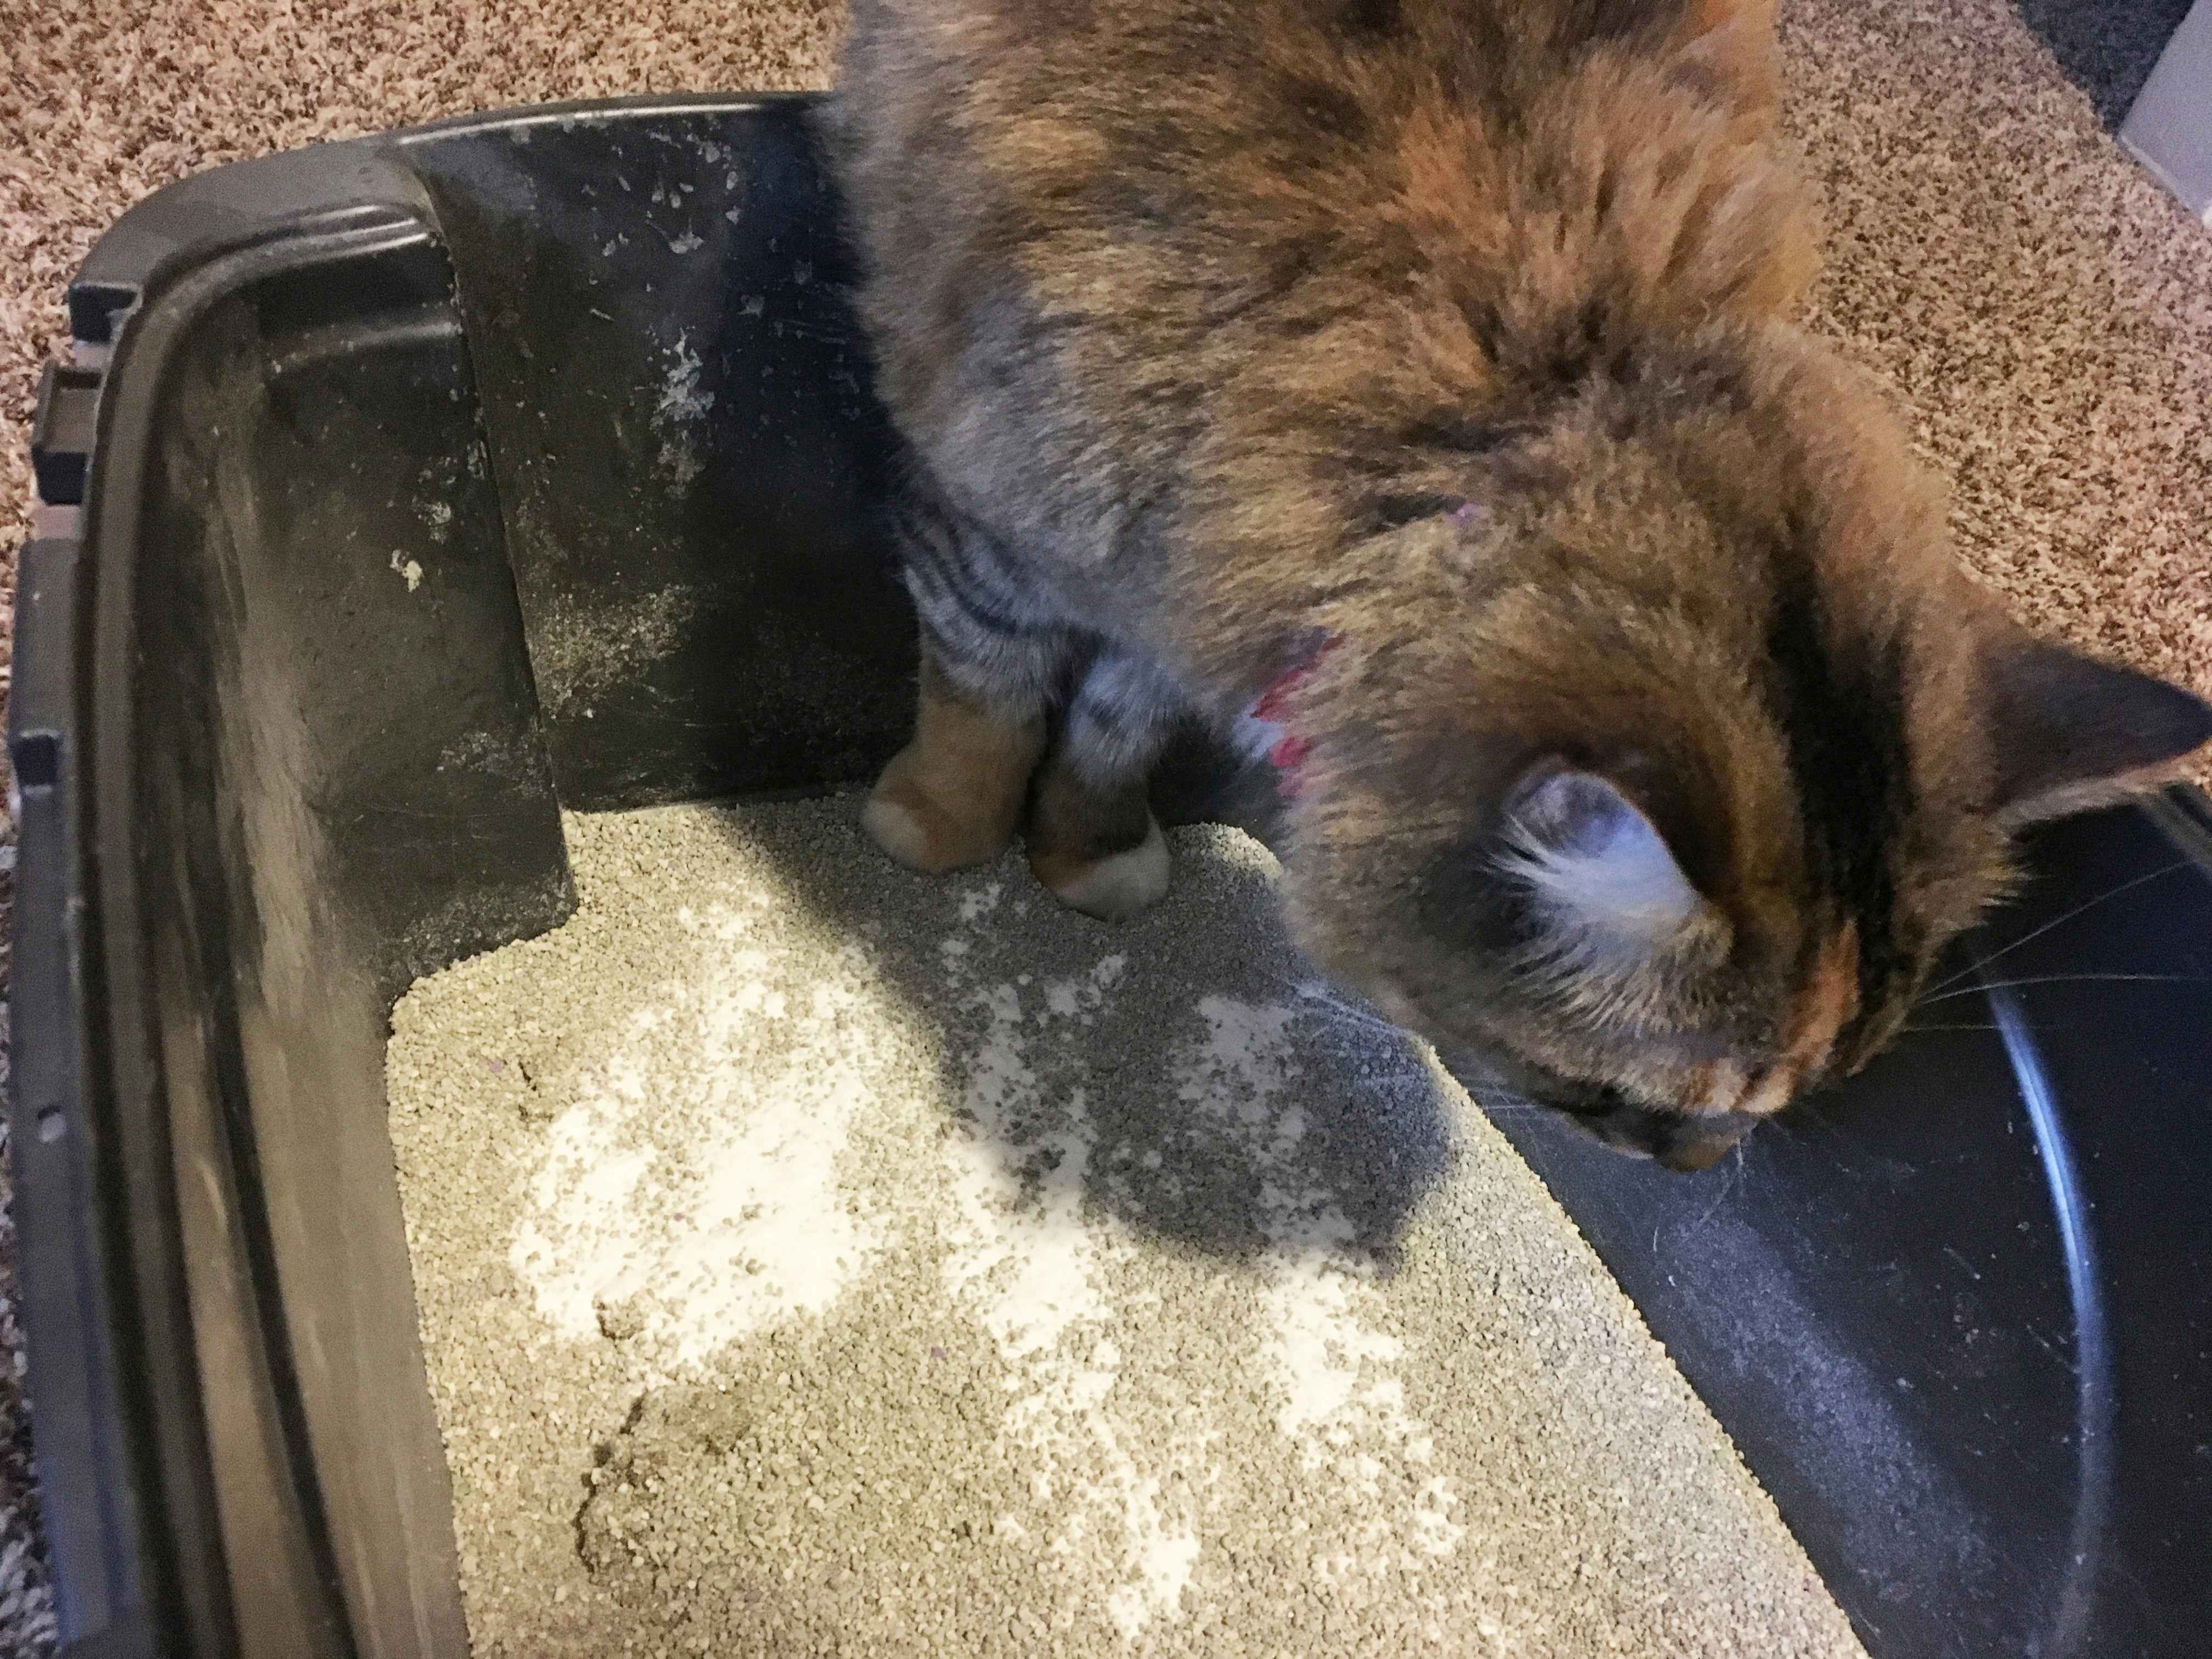 Freshen up your cat's litter box by sprinkling baby powder over it.